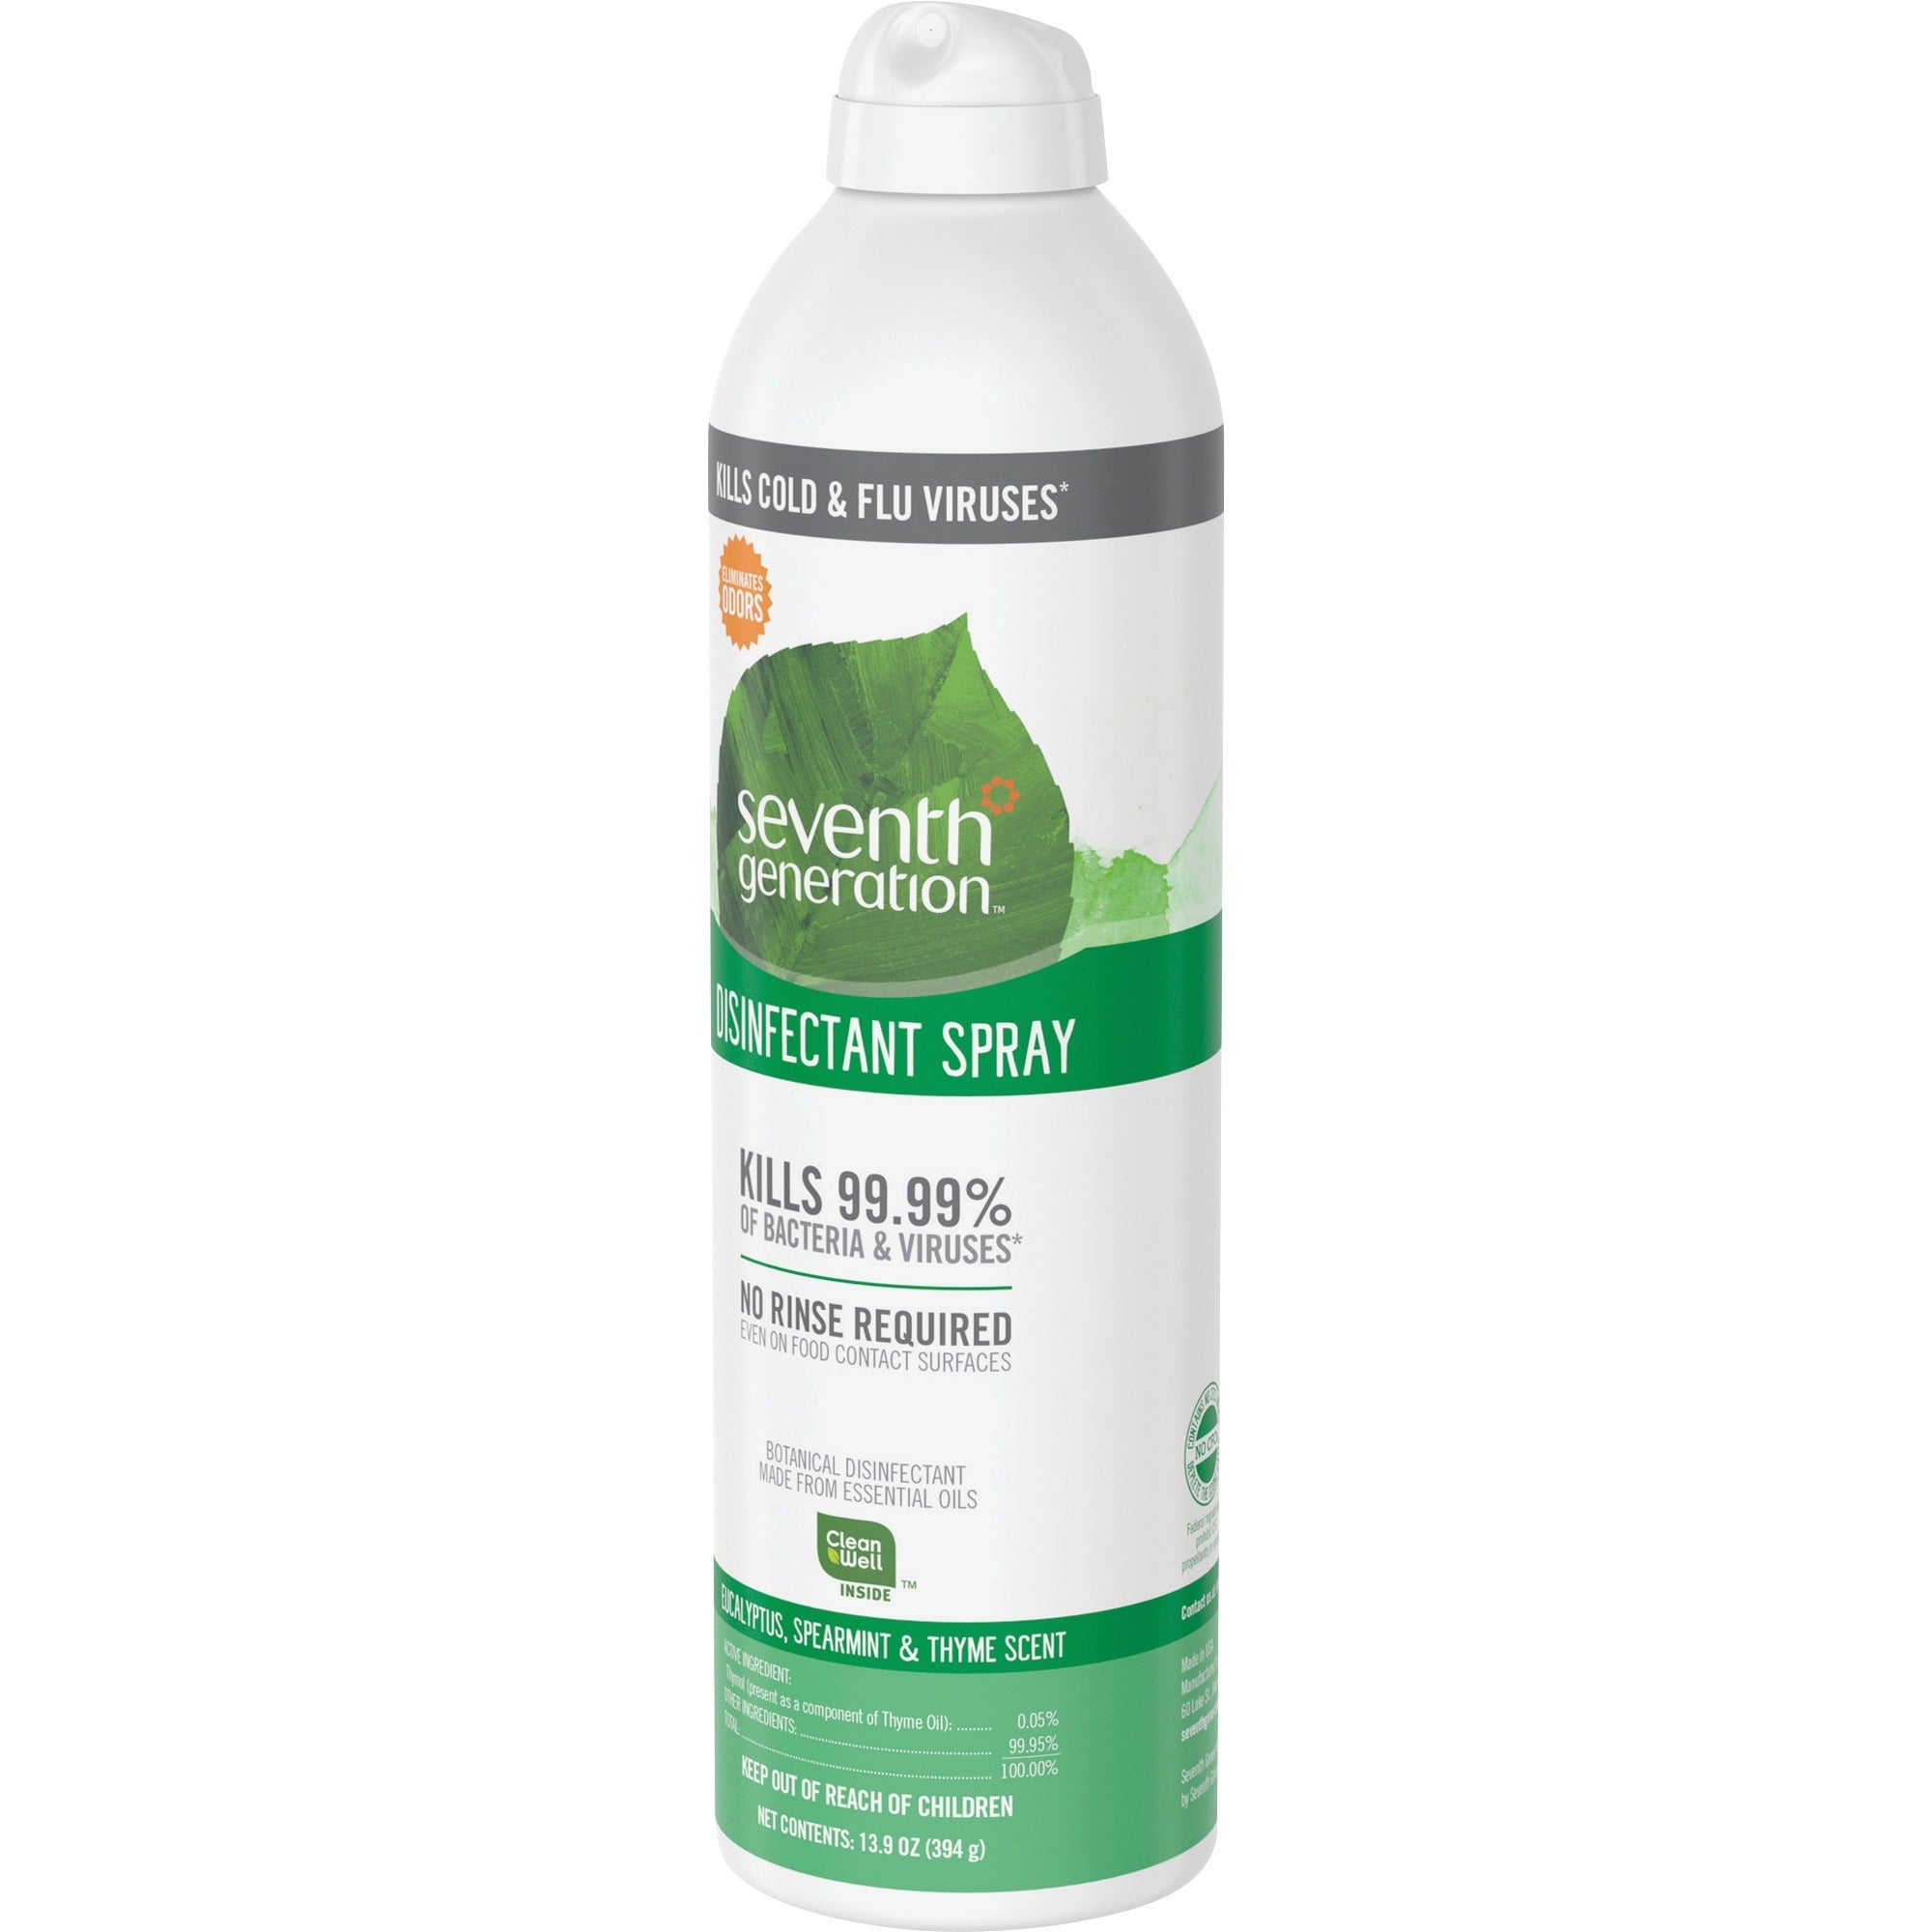 seventh-generation-disinfectant-cleaner-for-day-care-139-fl-oz-04-quart-eucalyptus-spearmint-&-thyme-scent-8-carton-non-flammable-rinse-free-antibacterial-disinfectant-clear_sev22981ct - 2